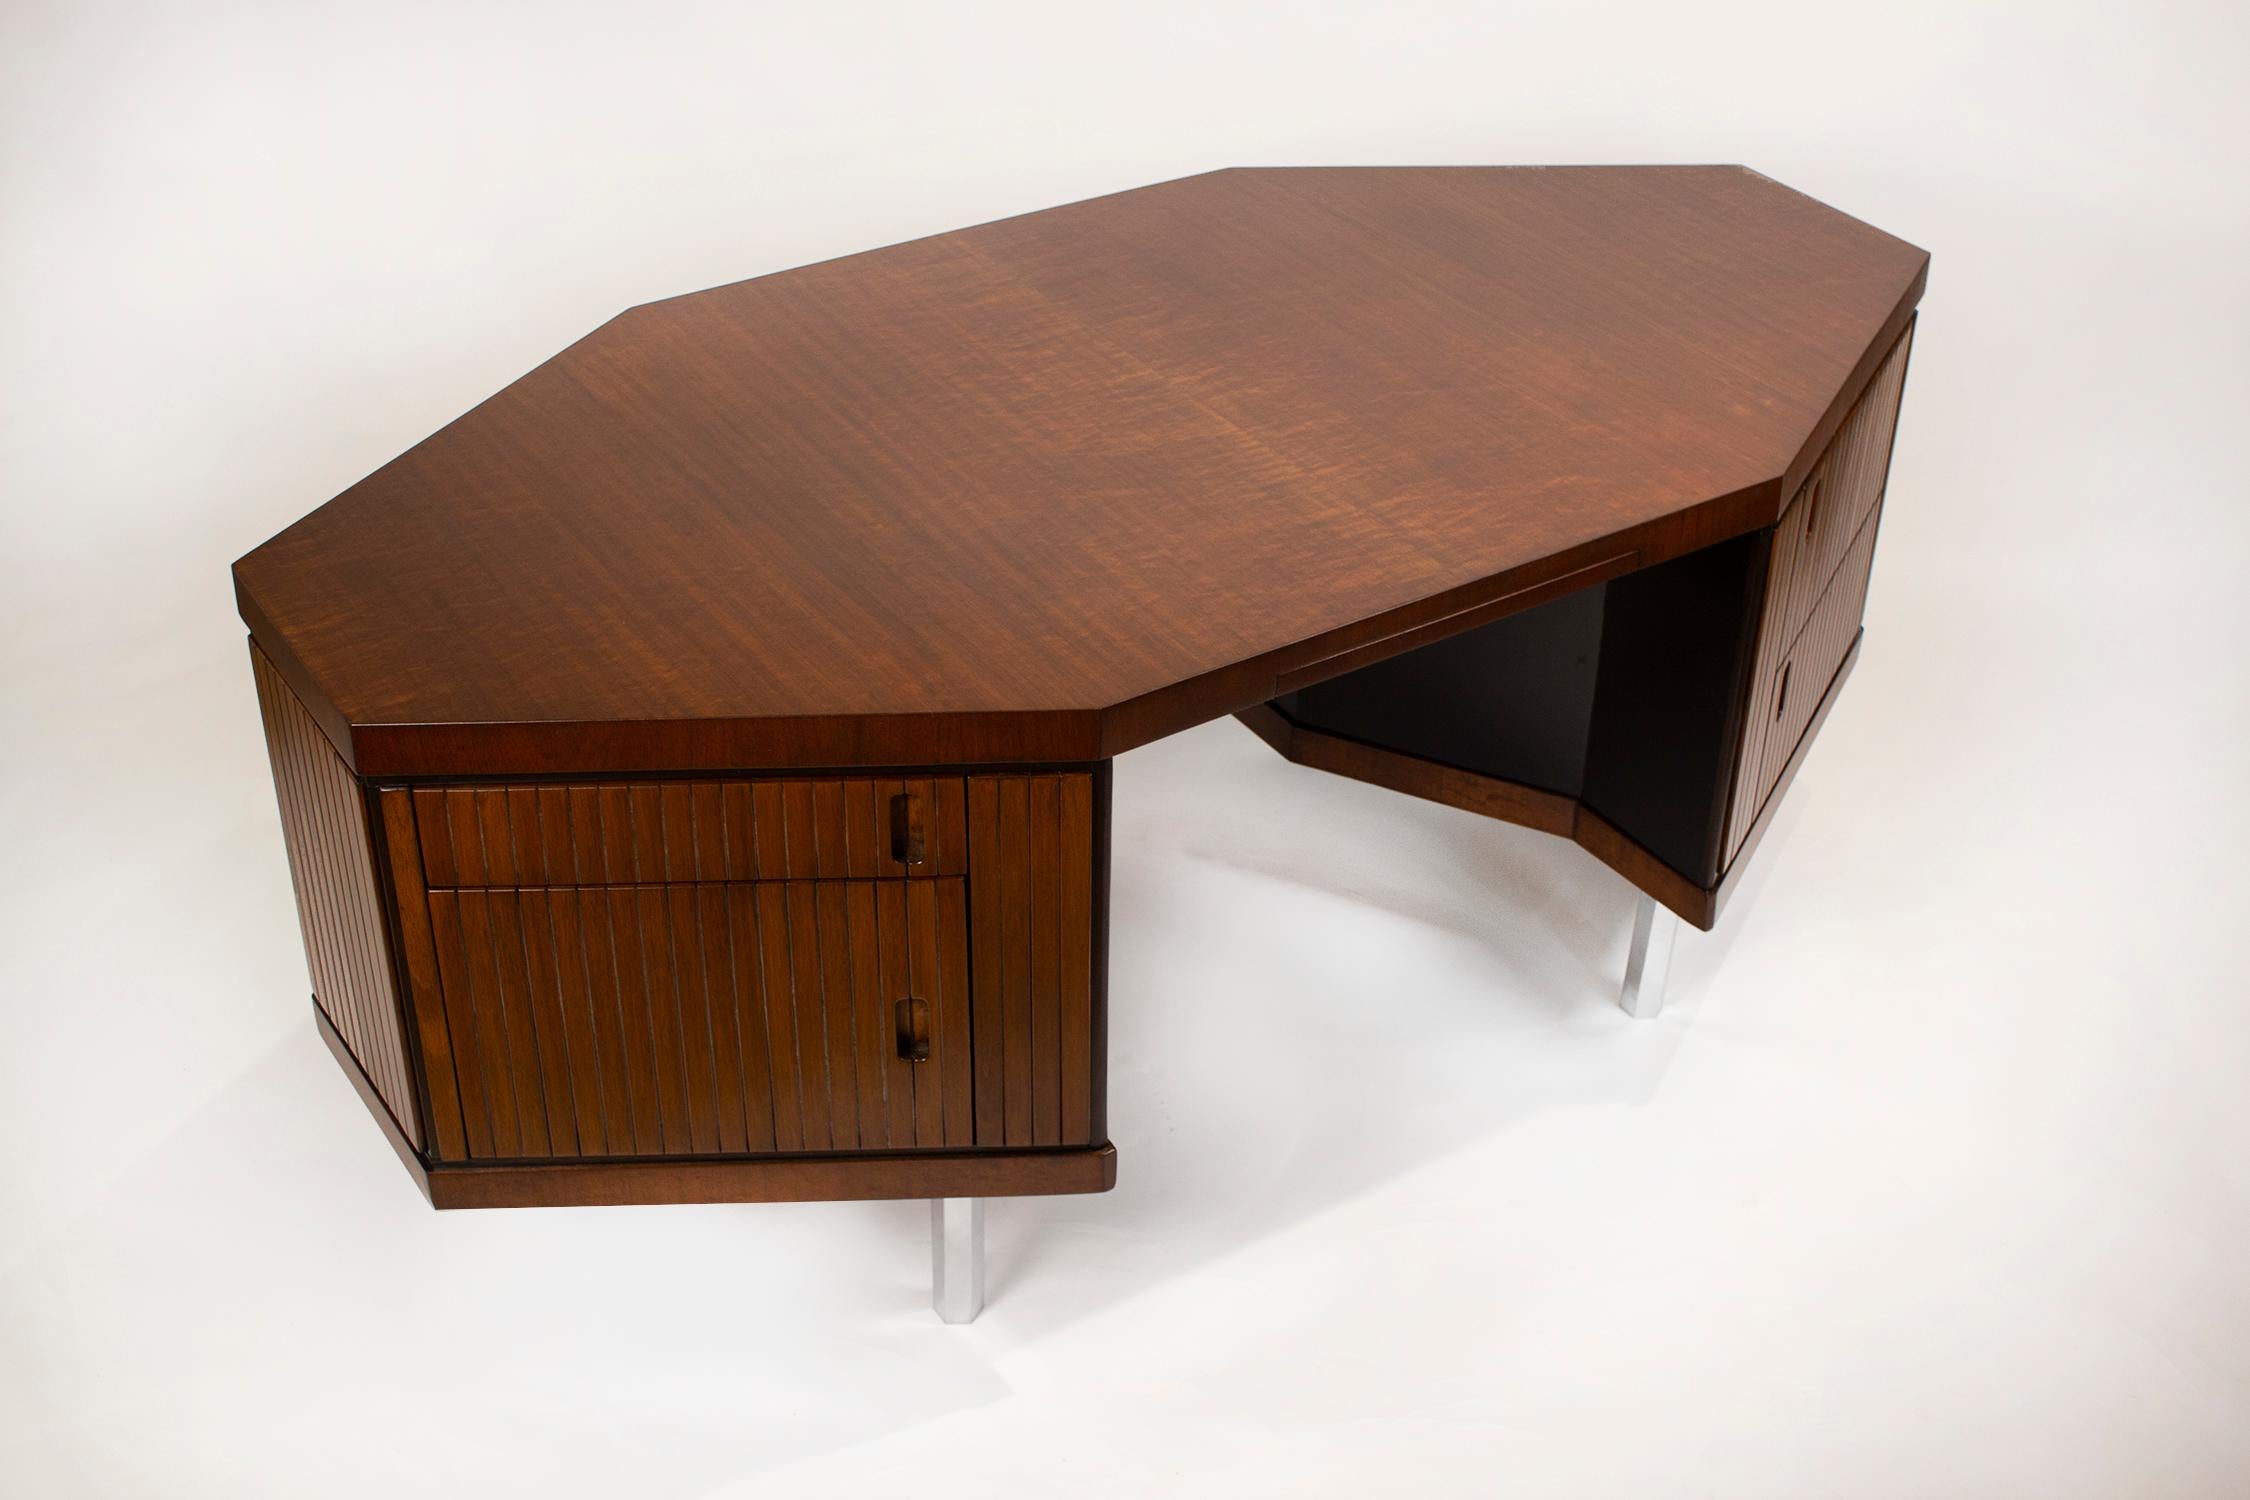 Custom made French ribbon mahogany and solid oak hexagonal Pierre Paulin desk. This desk was selected by Simon Doonan from a Parisian dealer as one of the key pieces used as a floor display in the women's couture department of the Barney's New York